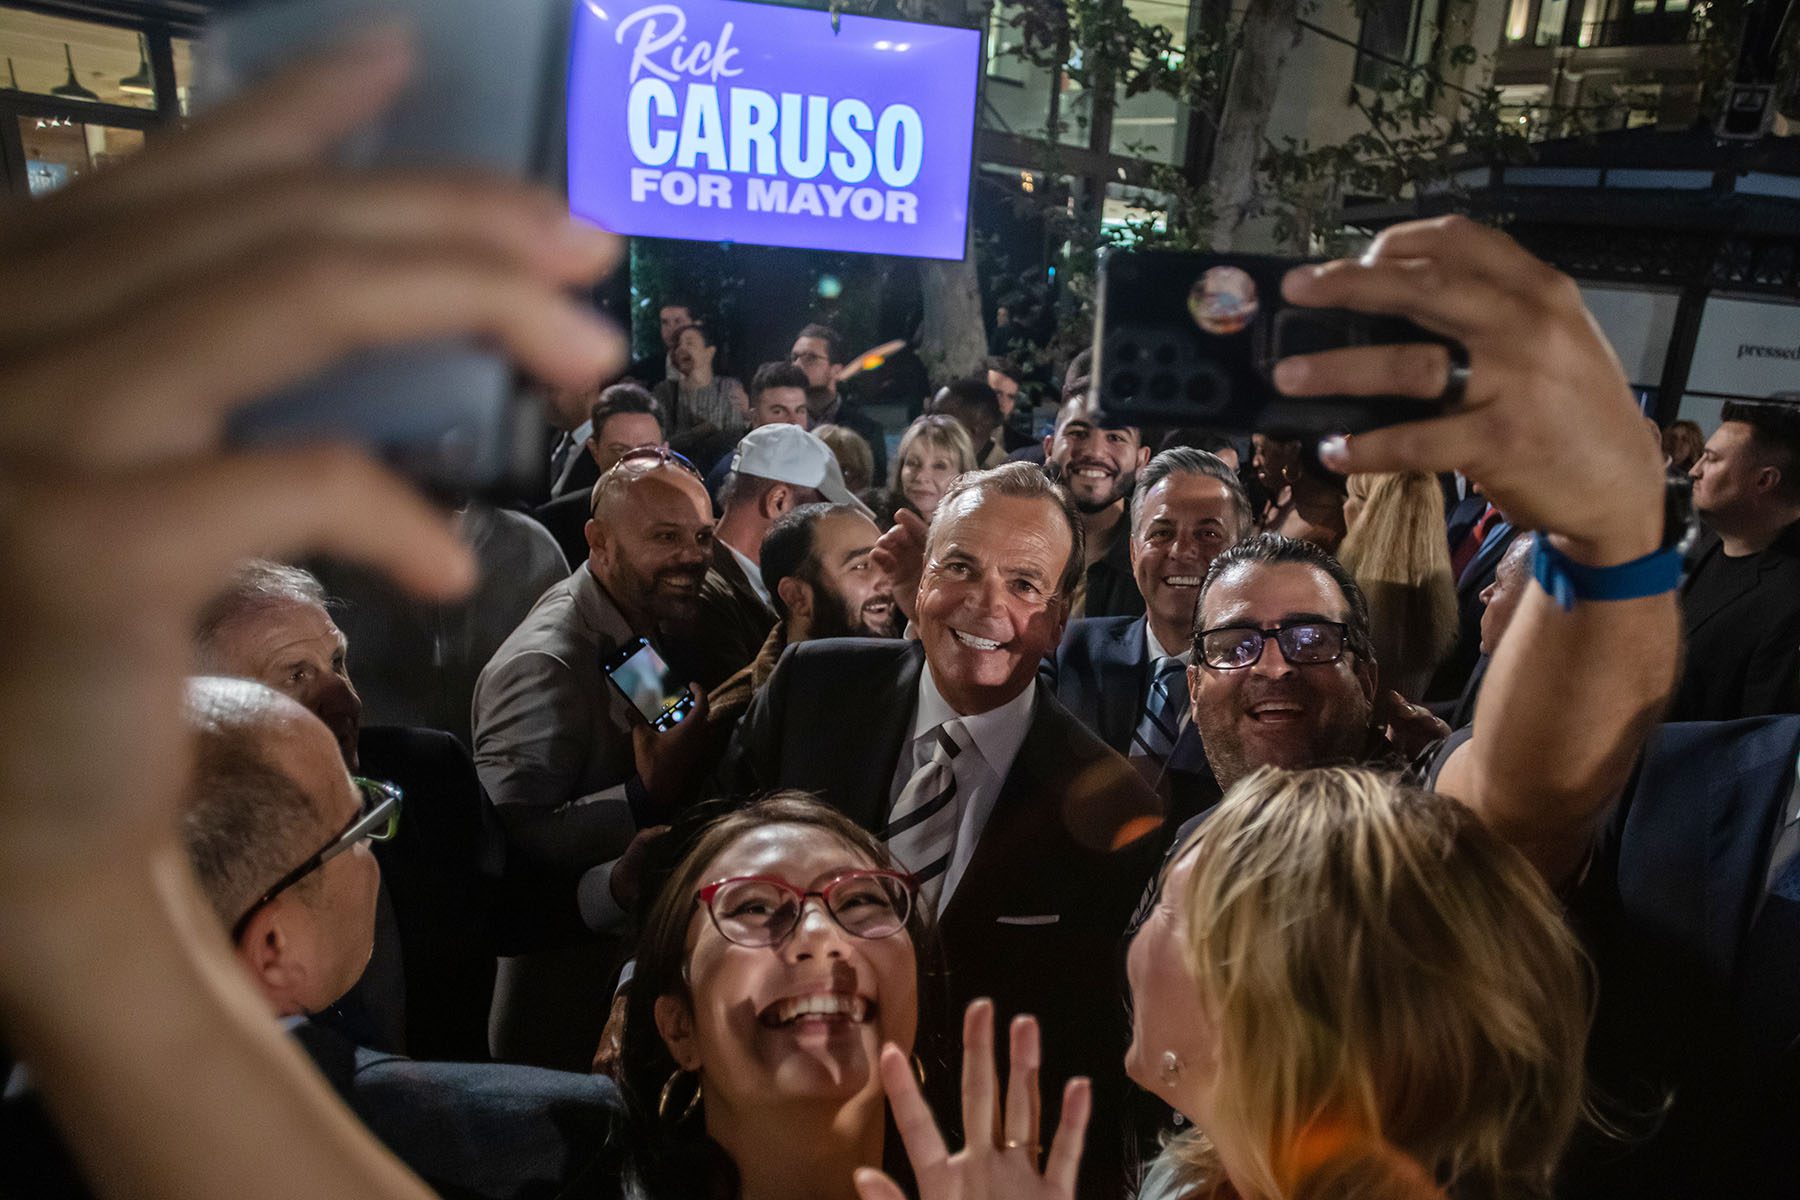 Rick Caruso poses for selfies with supporters